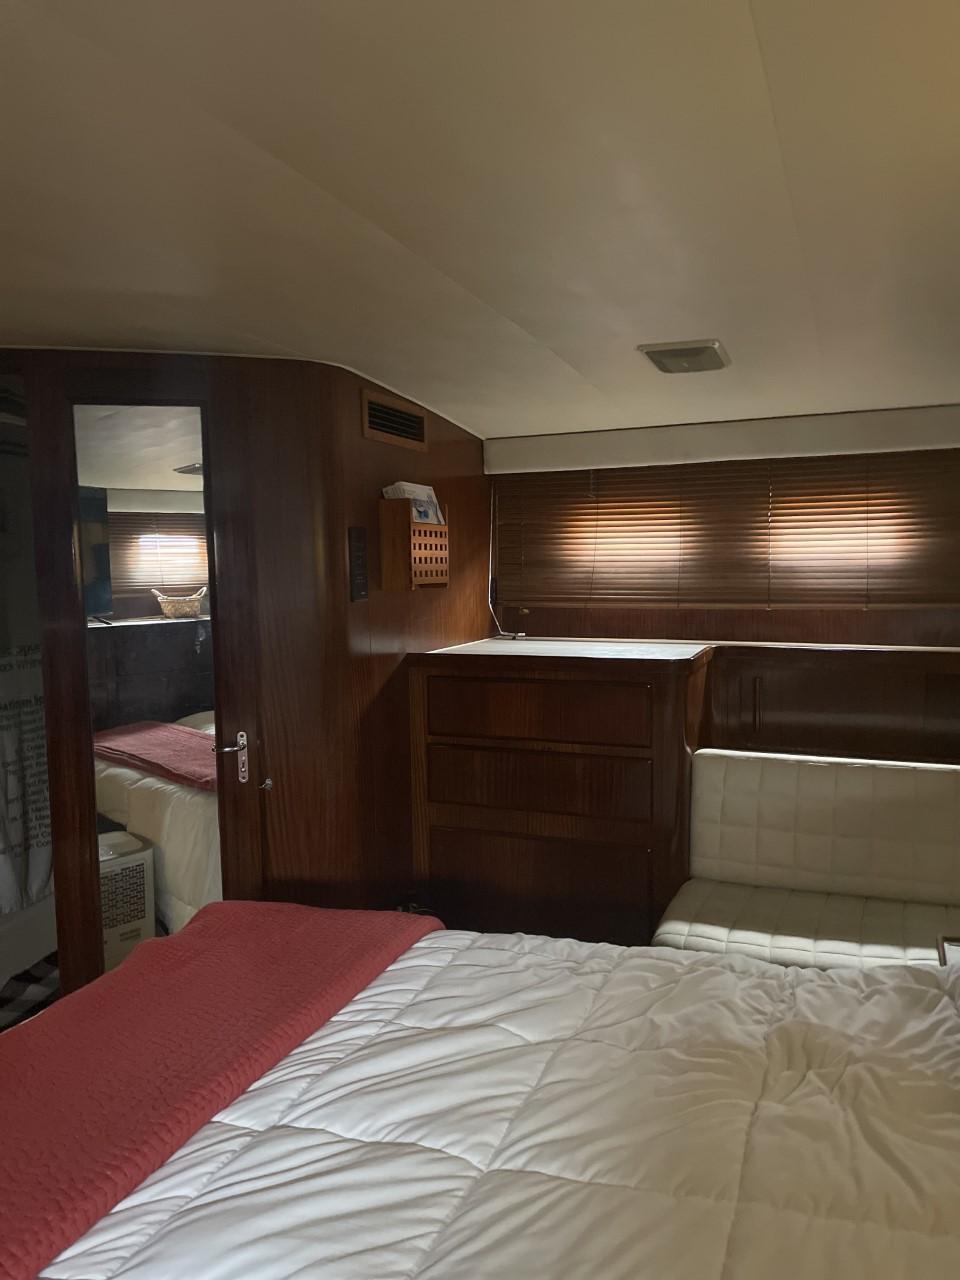 1989 67 Hatteras Motor Yacht Class Act Master Stateroom